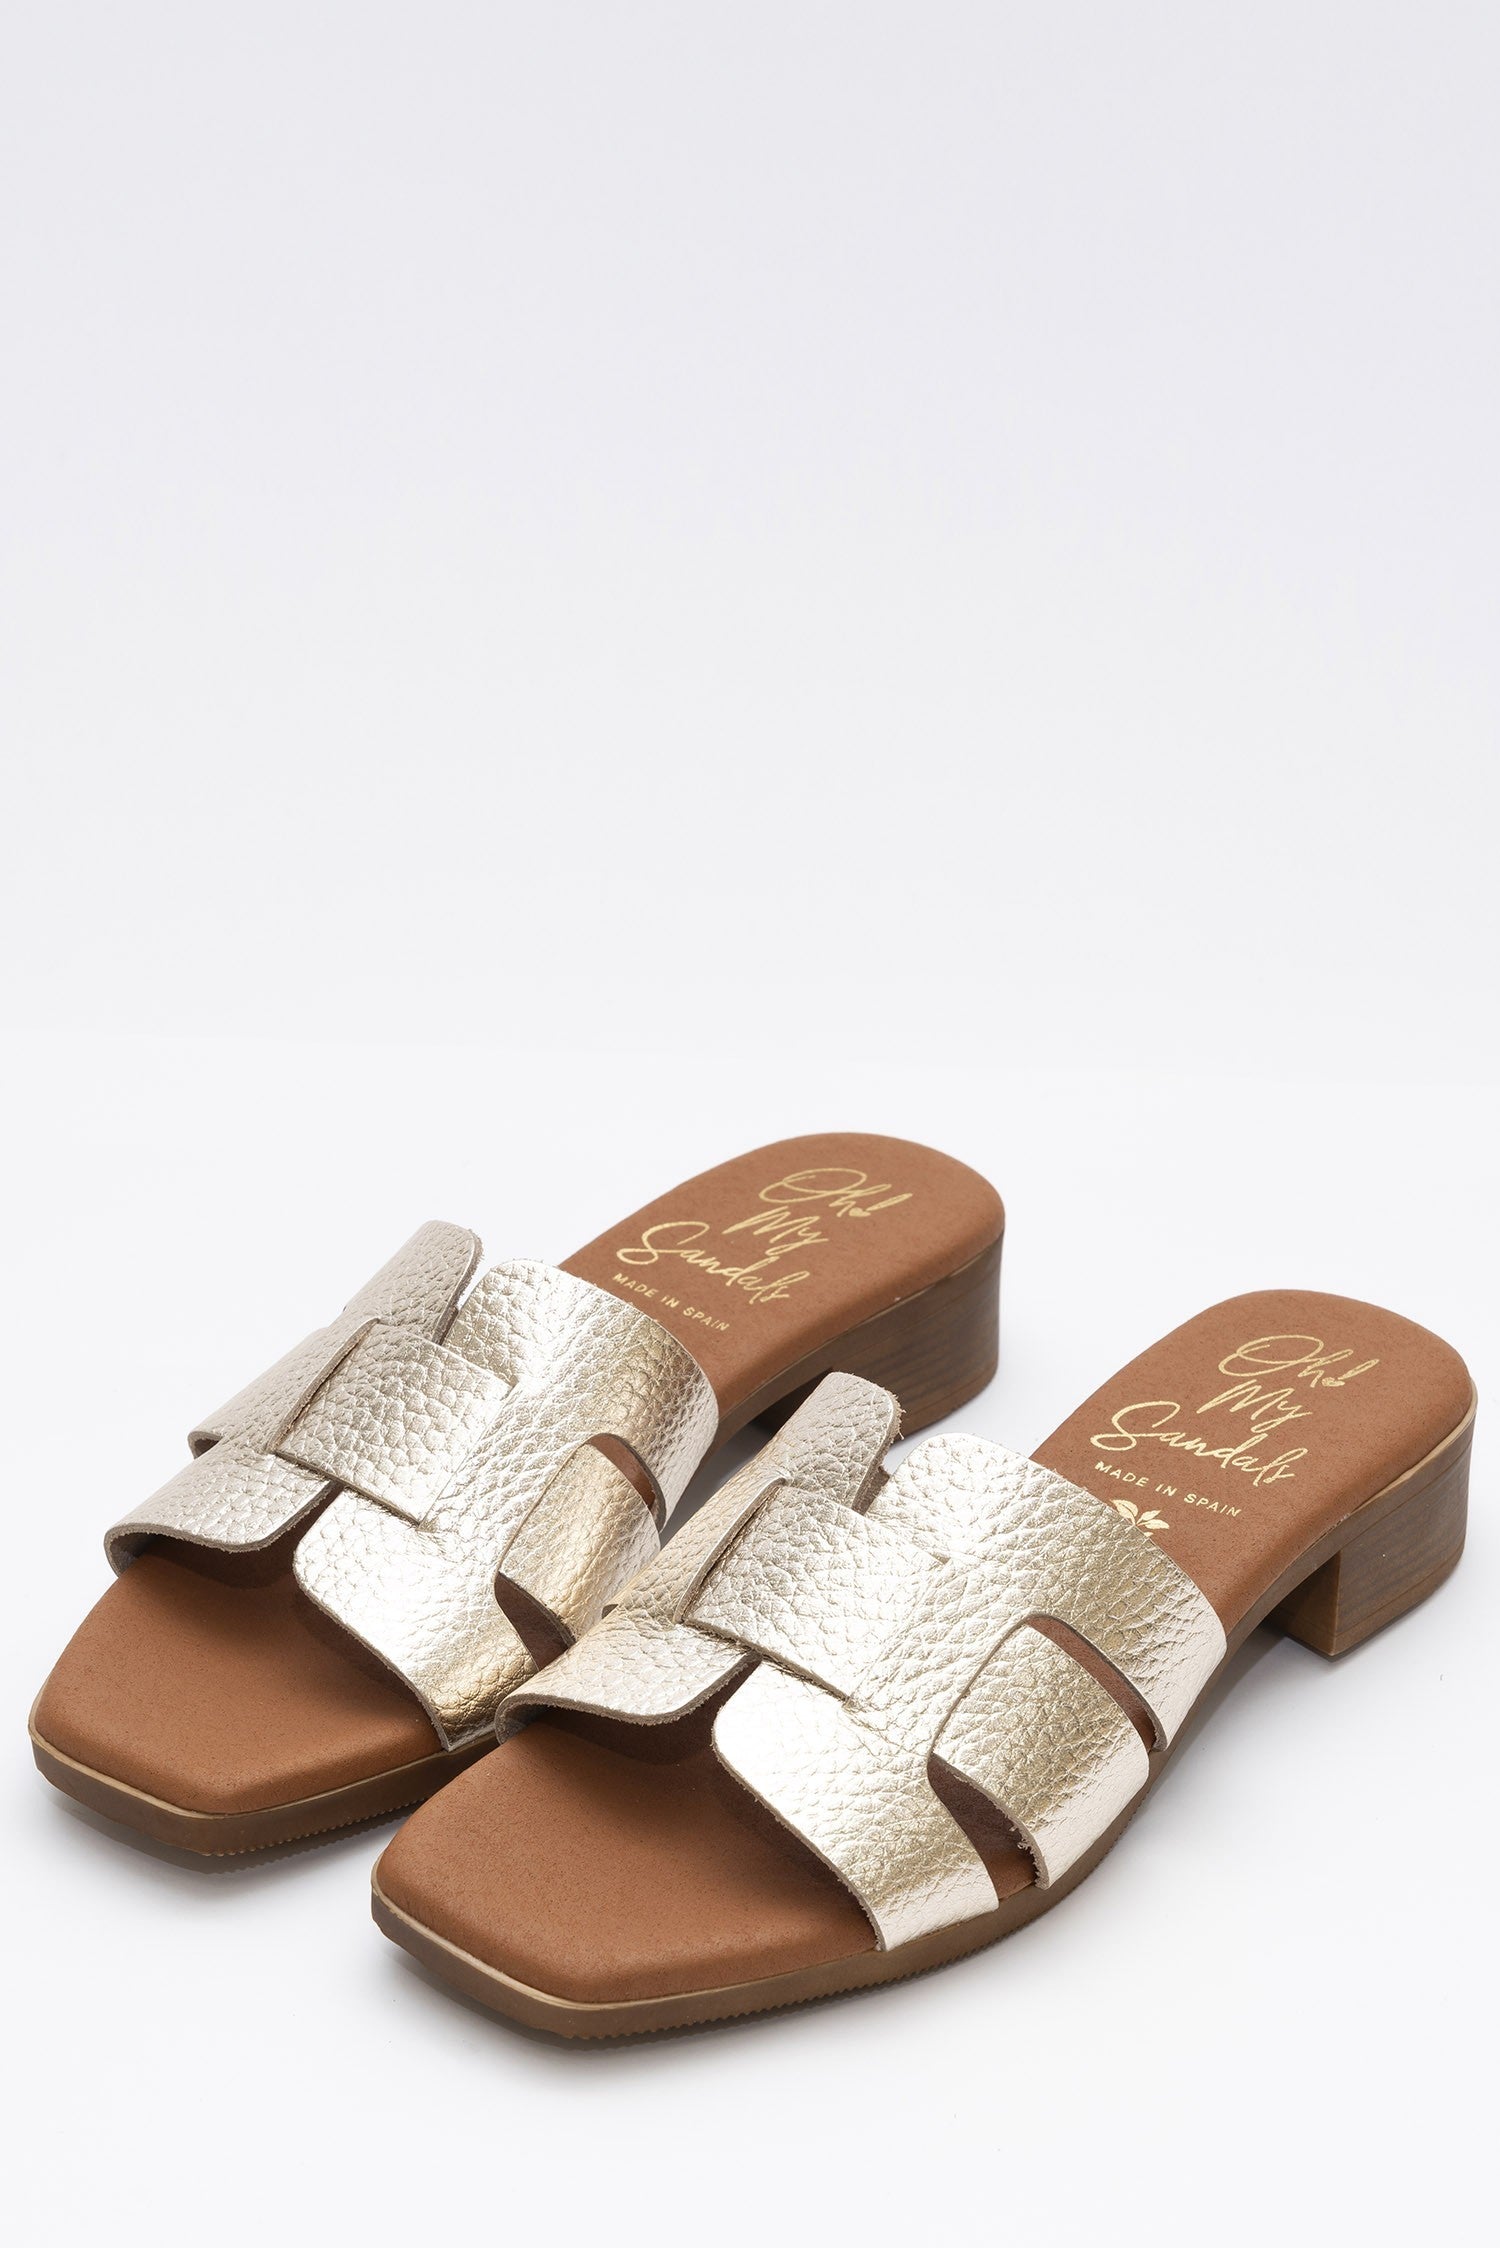 Oh My Sandals Champagne Leather Slip-On Sandal